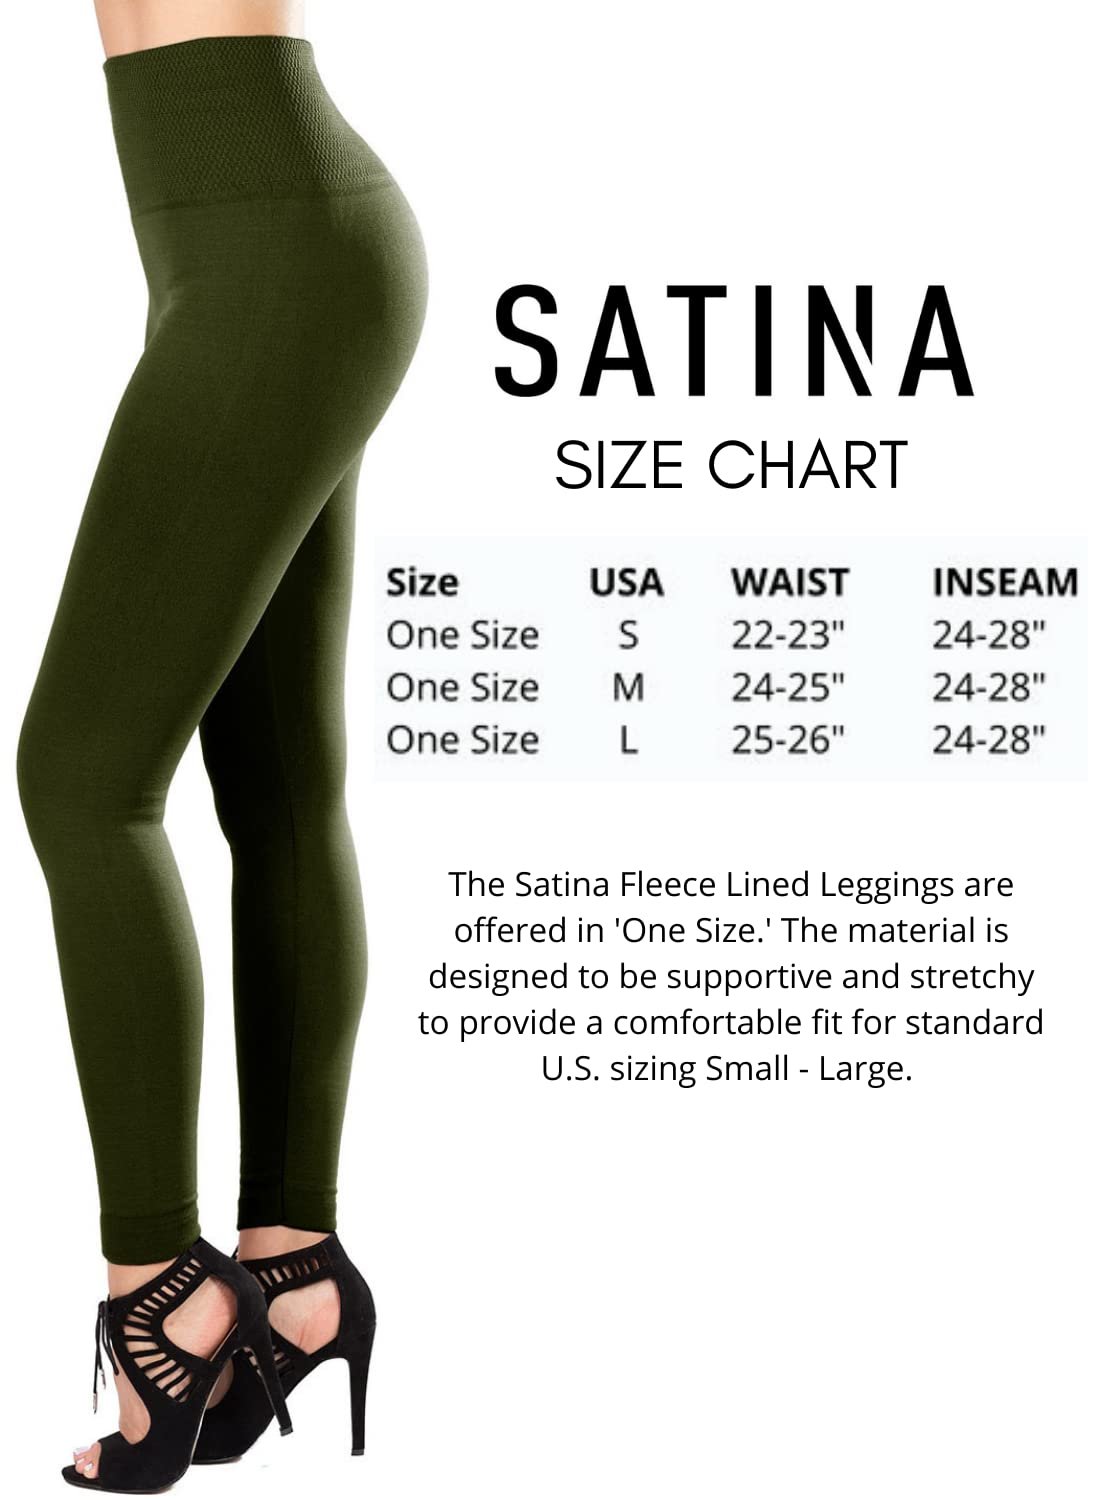 SATINA High Waisted Leggings for Women | Tummy Control & Compression Waistband (One Size (High Waist), Olive)